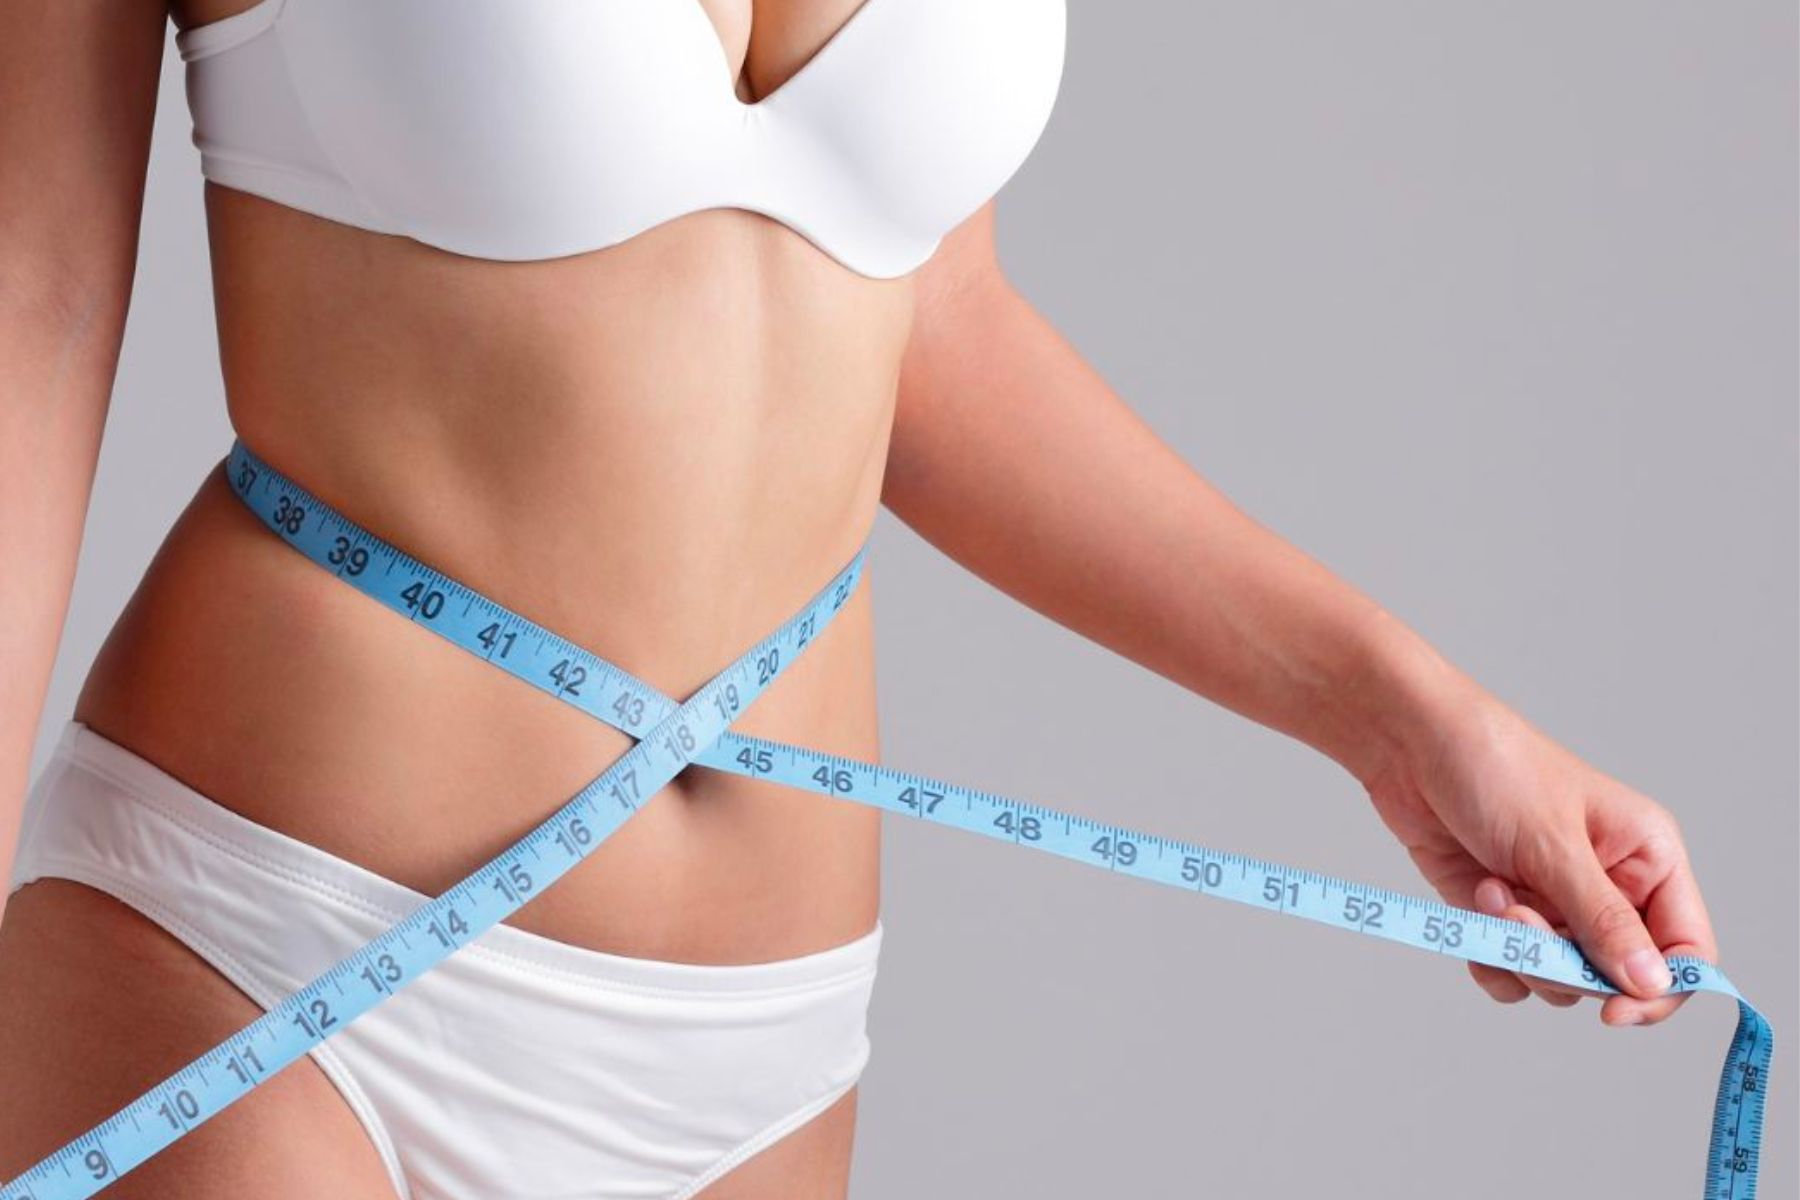 Achieve Your Dream Body with truSculpt at Reno Tahoe Dermatology - $500 OFF The TRUBODY Sculpting Package!